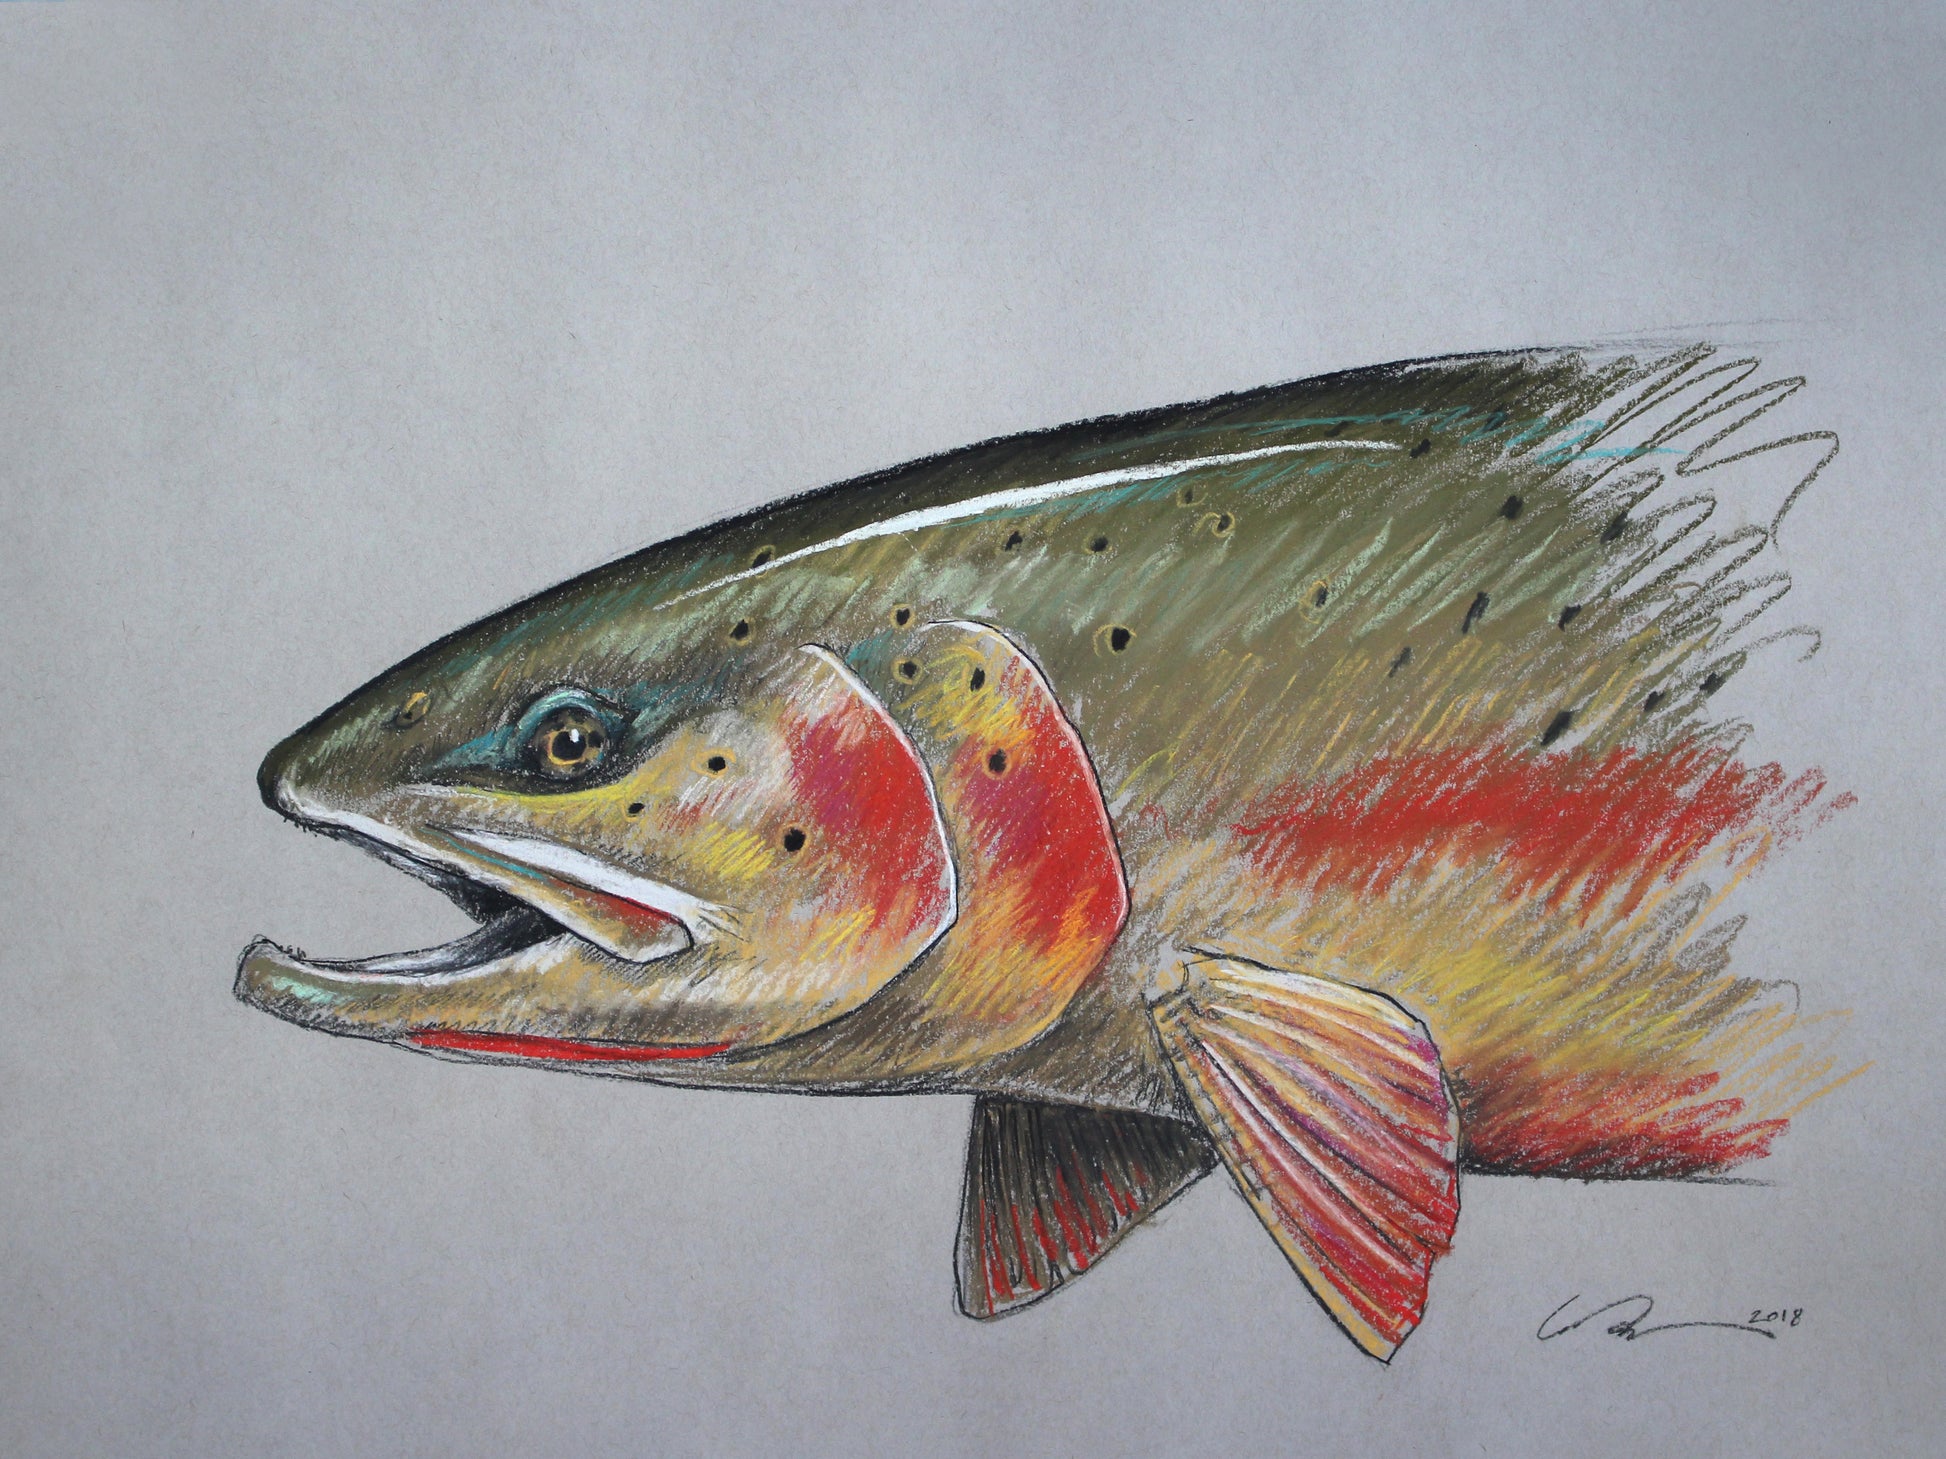 A full color drawing of the front half of a cutthroat trout